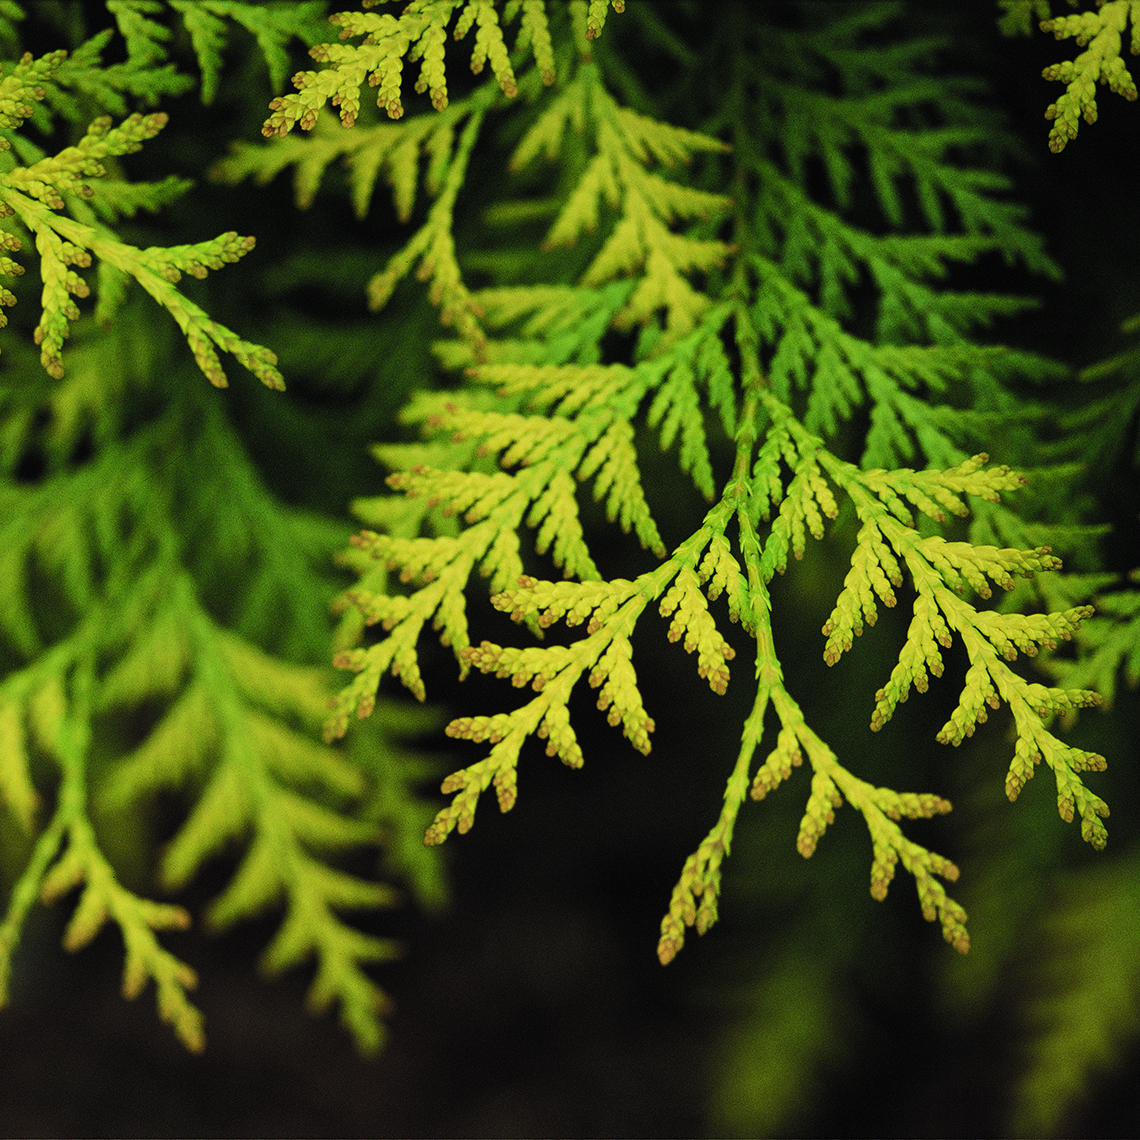 Closeup of the foliage of Techny Gold arborvitae showing its color and texture